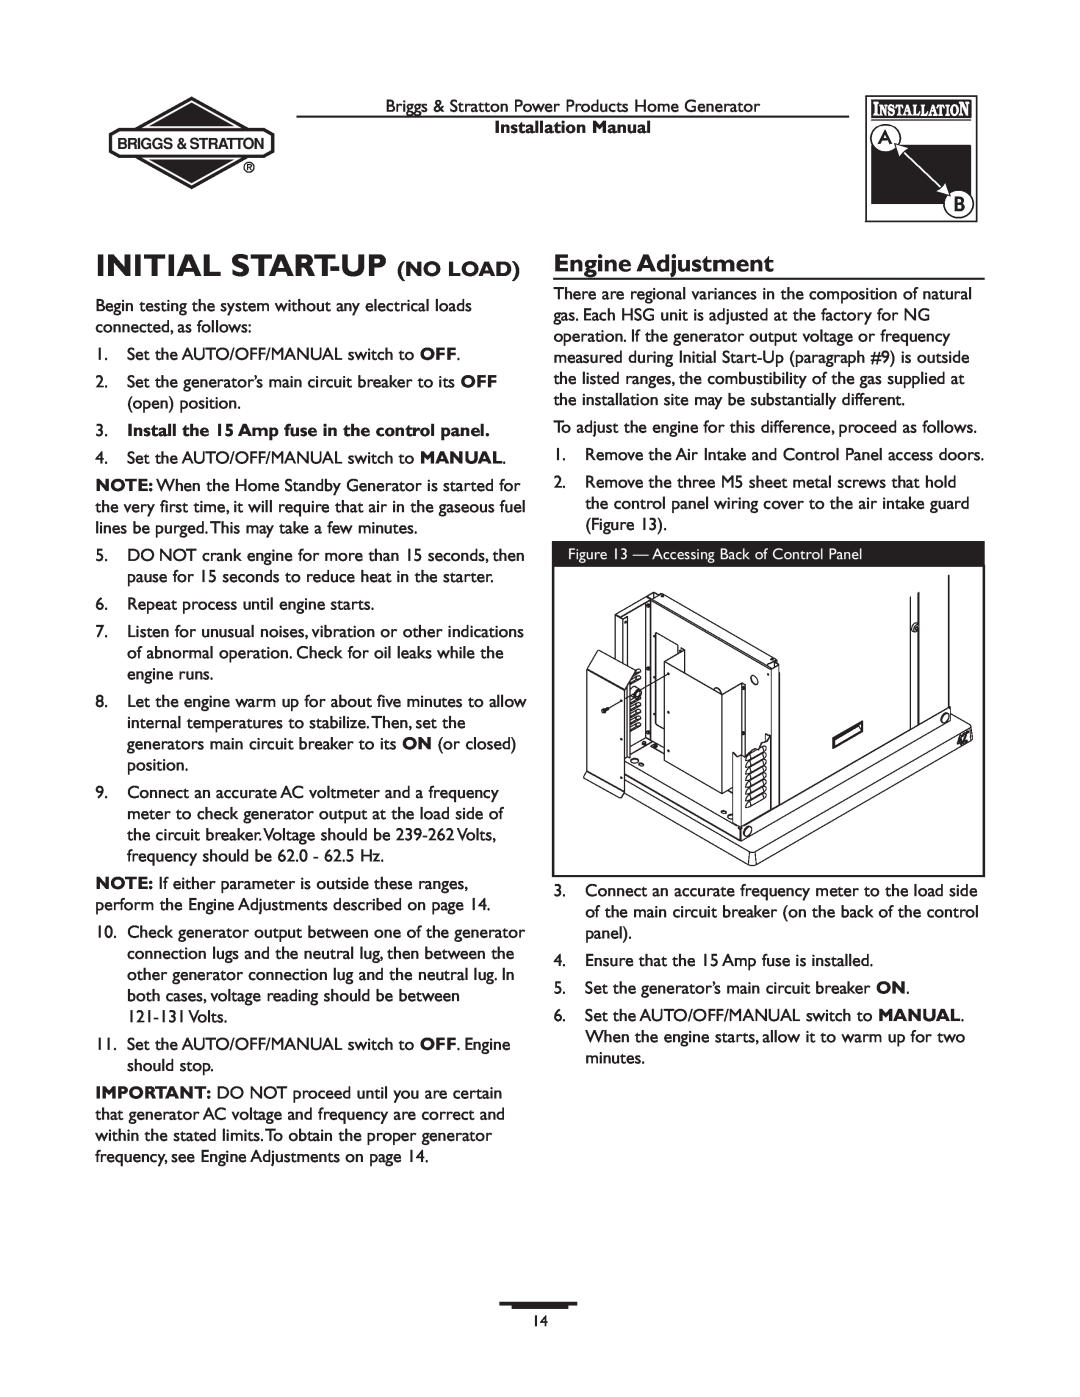 Briggs & Stratton 01938-0 manual Initial Start-Up No Load, Engine Adjustment, Install the 15 Amp fuse in the control panel 